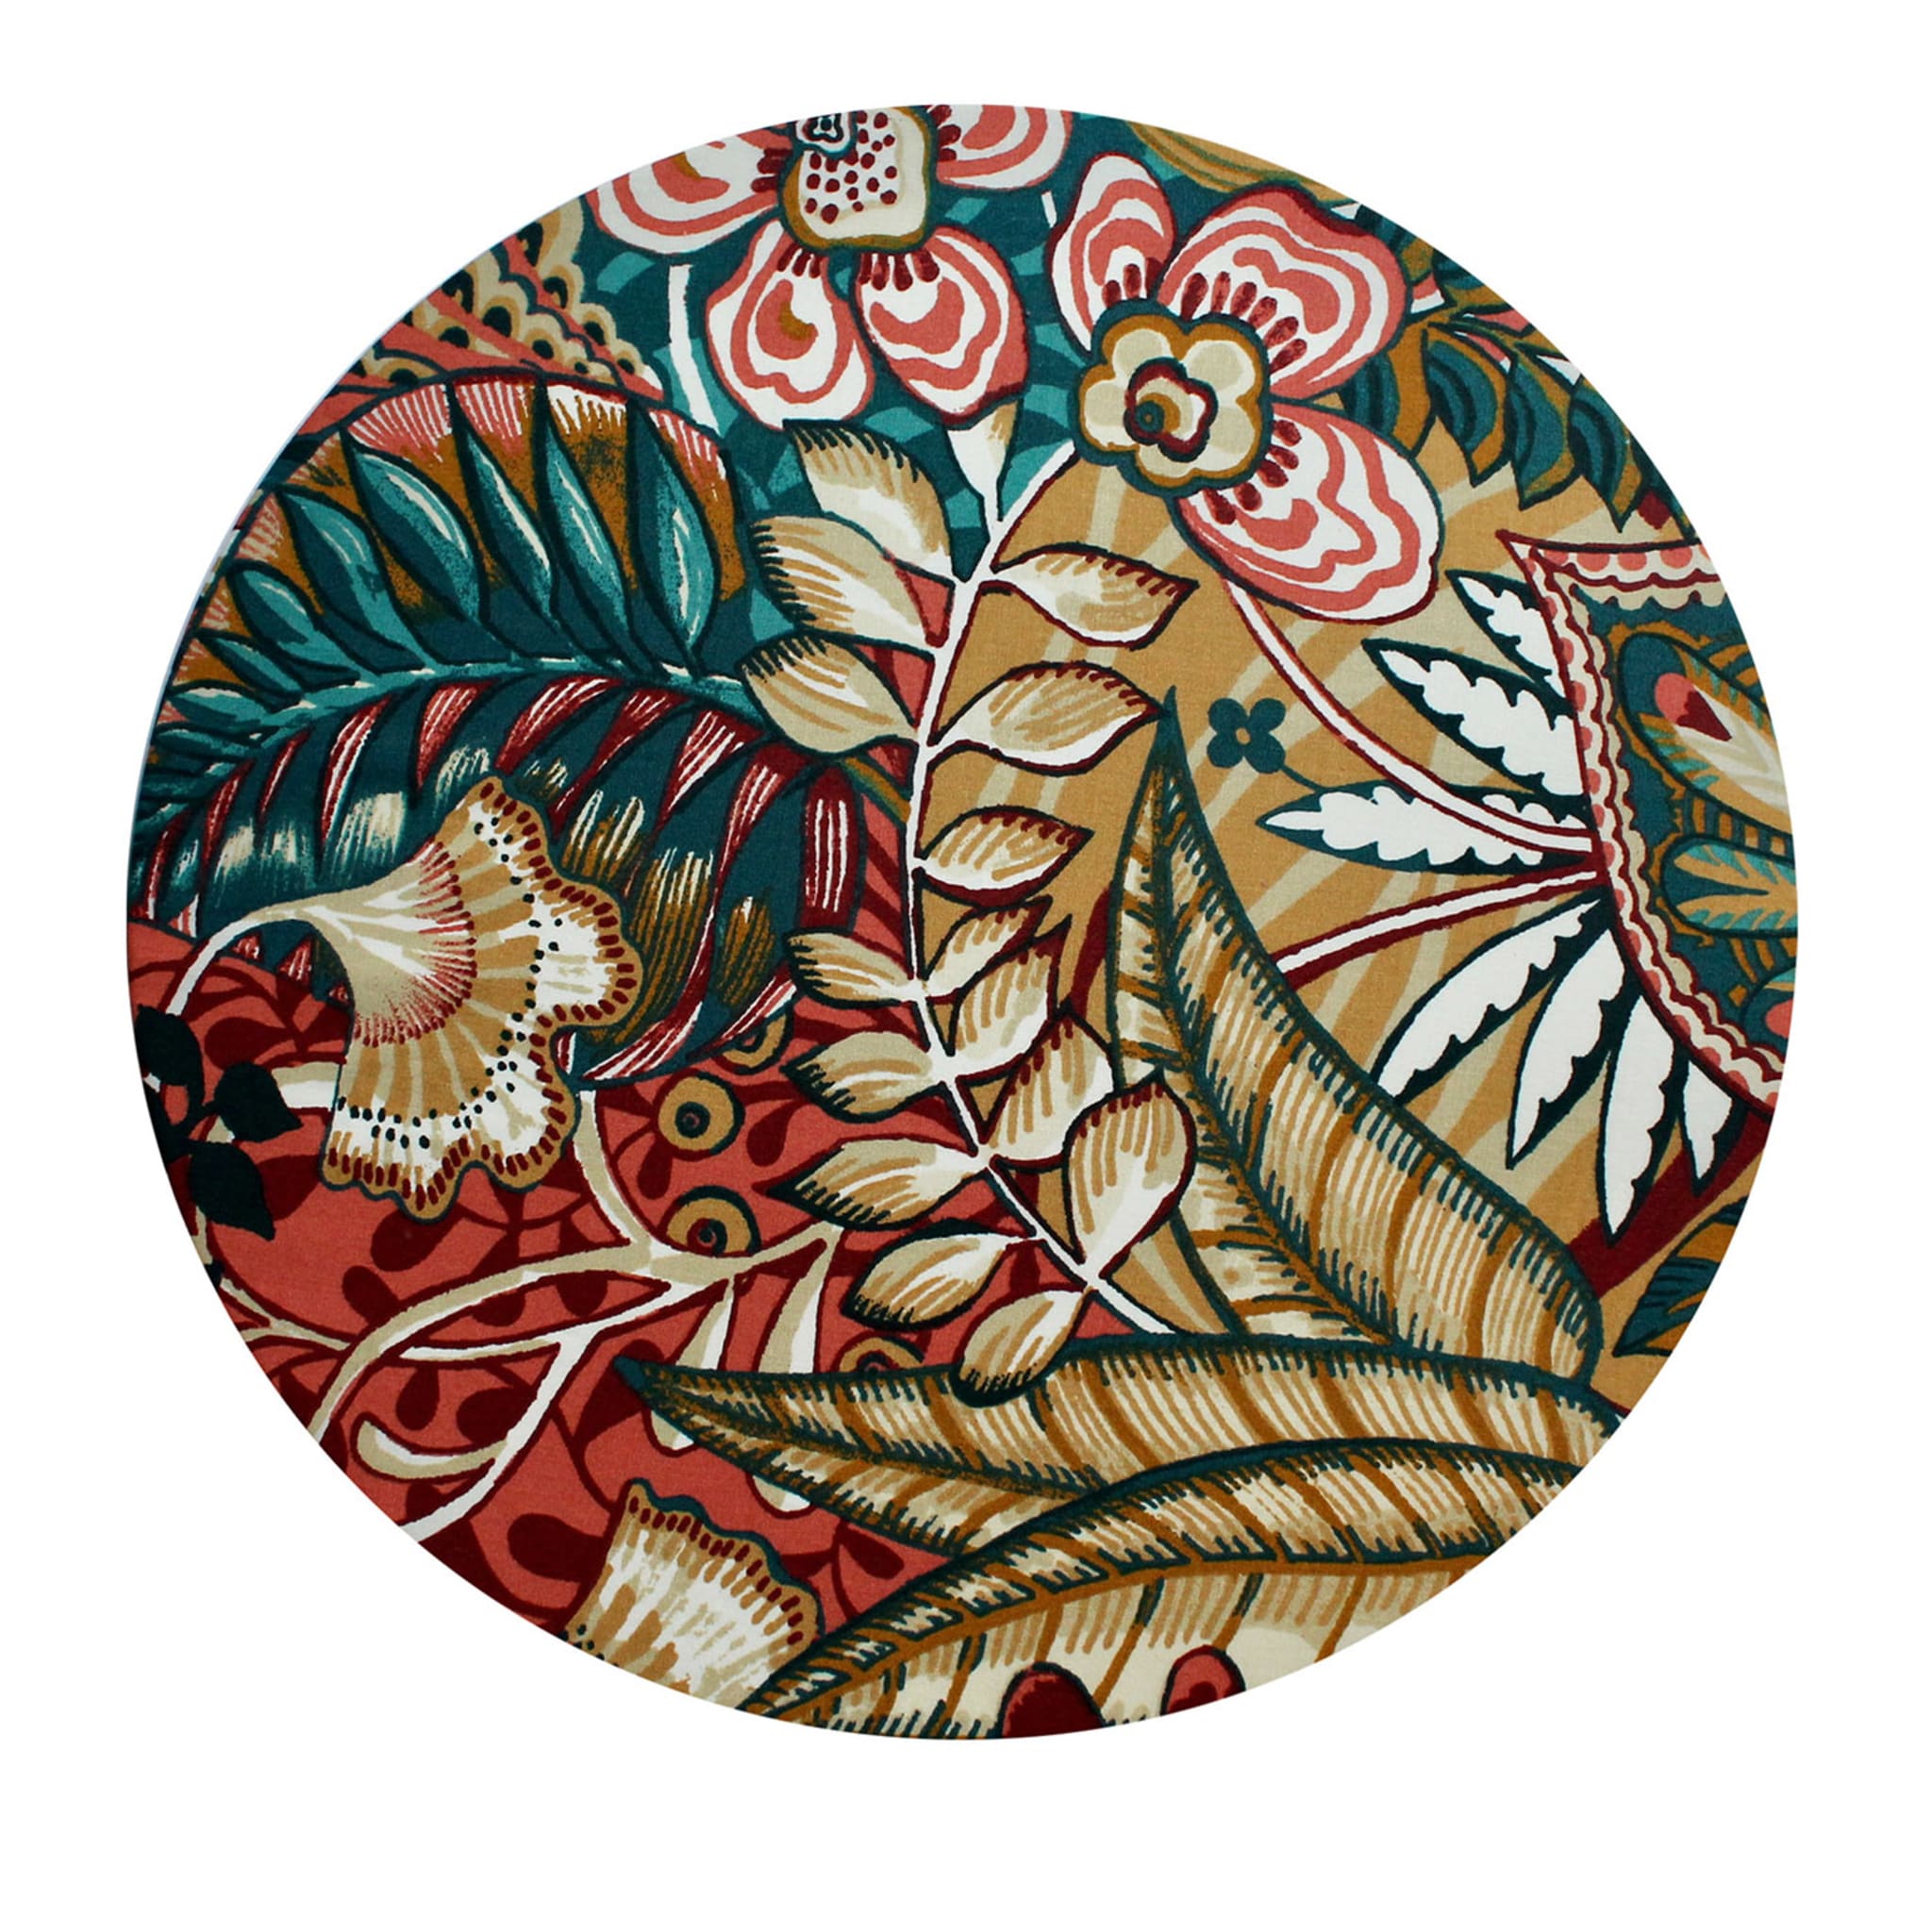 Cuffiette Floral Round Polychrome Placemat #2 - Main view